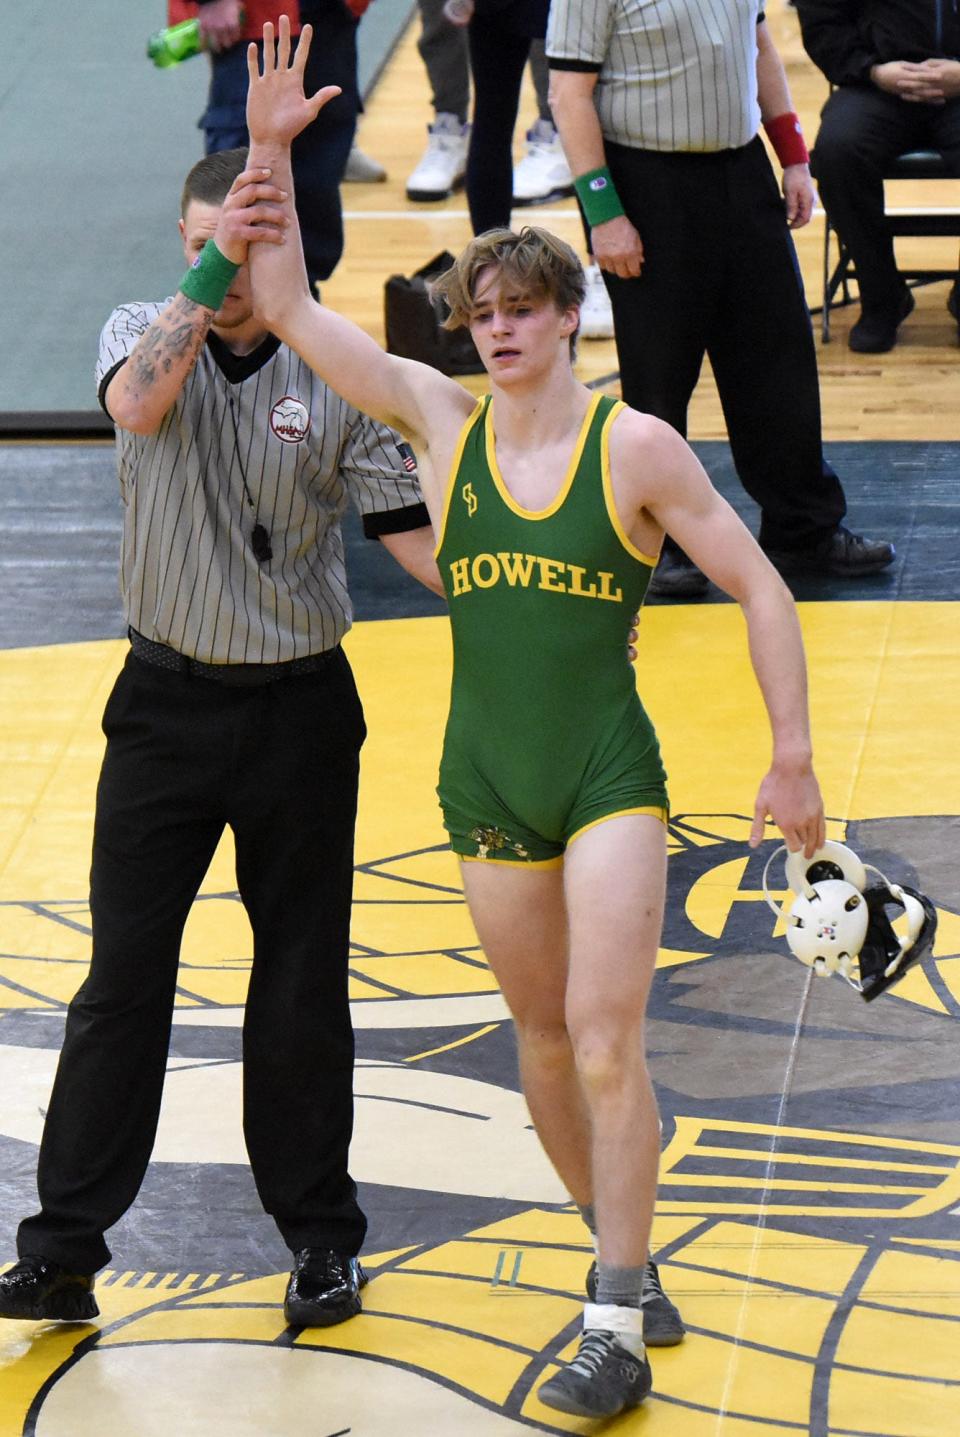 Brady Butcher won the final match against Livonia Franklin, giving Howell a 32-29 victory on Wednesday, Feb. 1, 2023.